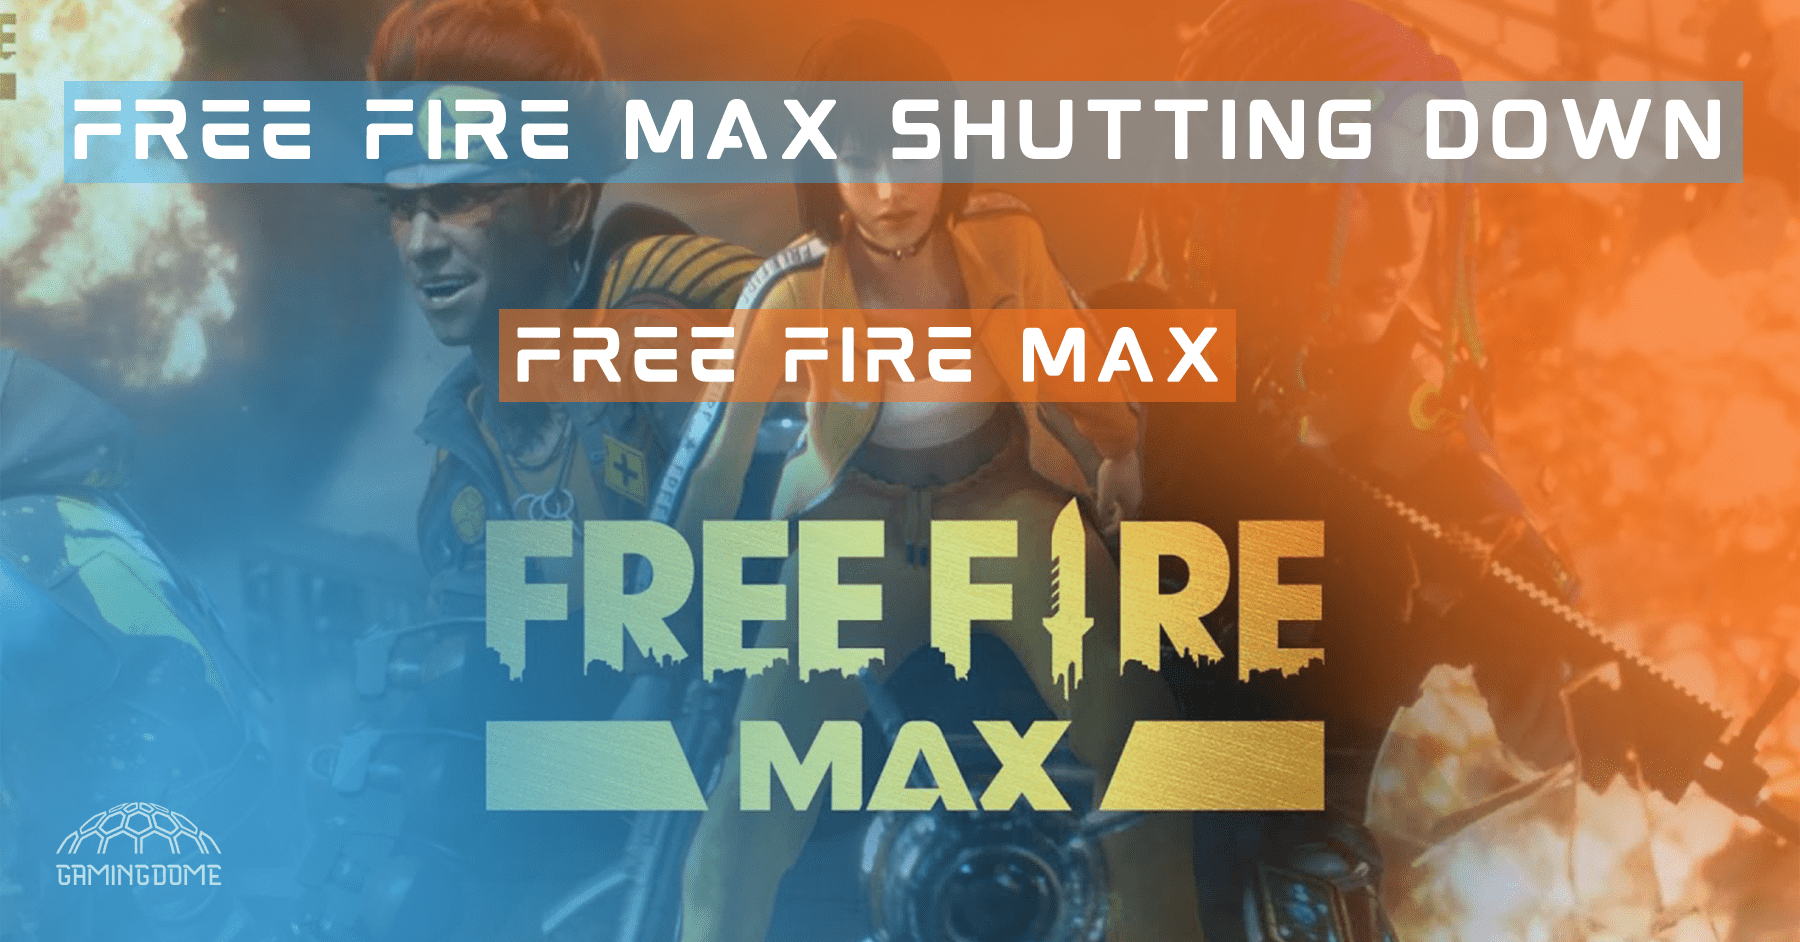 Free Fire MAX Shutting Down: Players Urged to Switch to Original